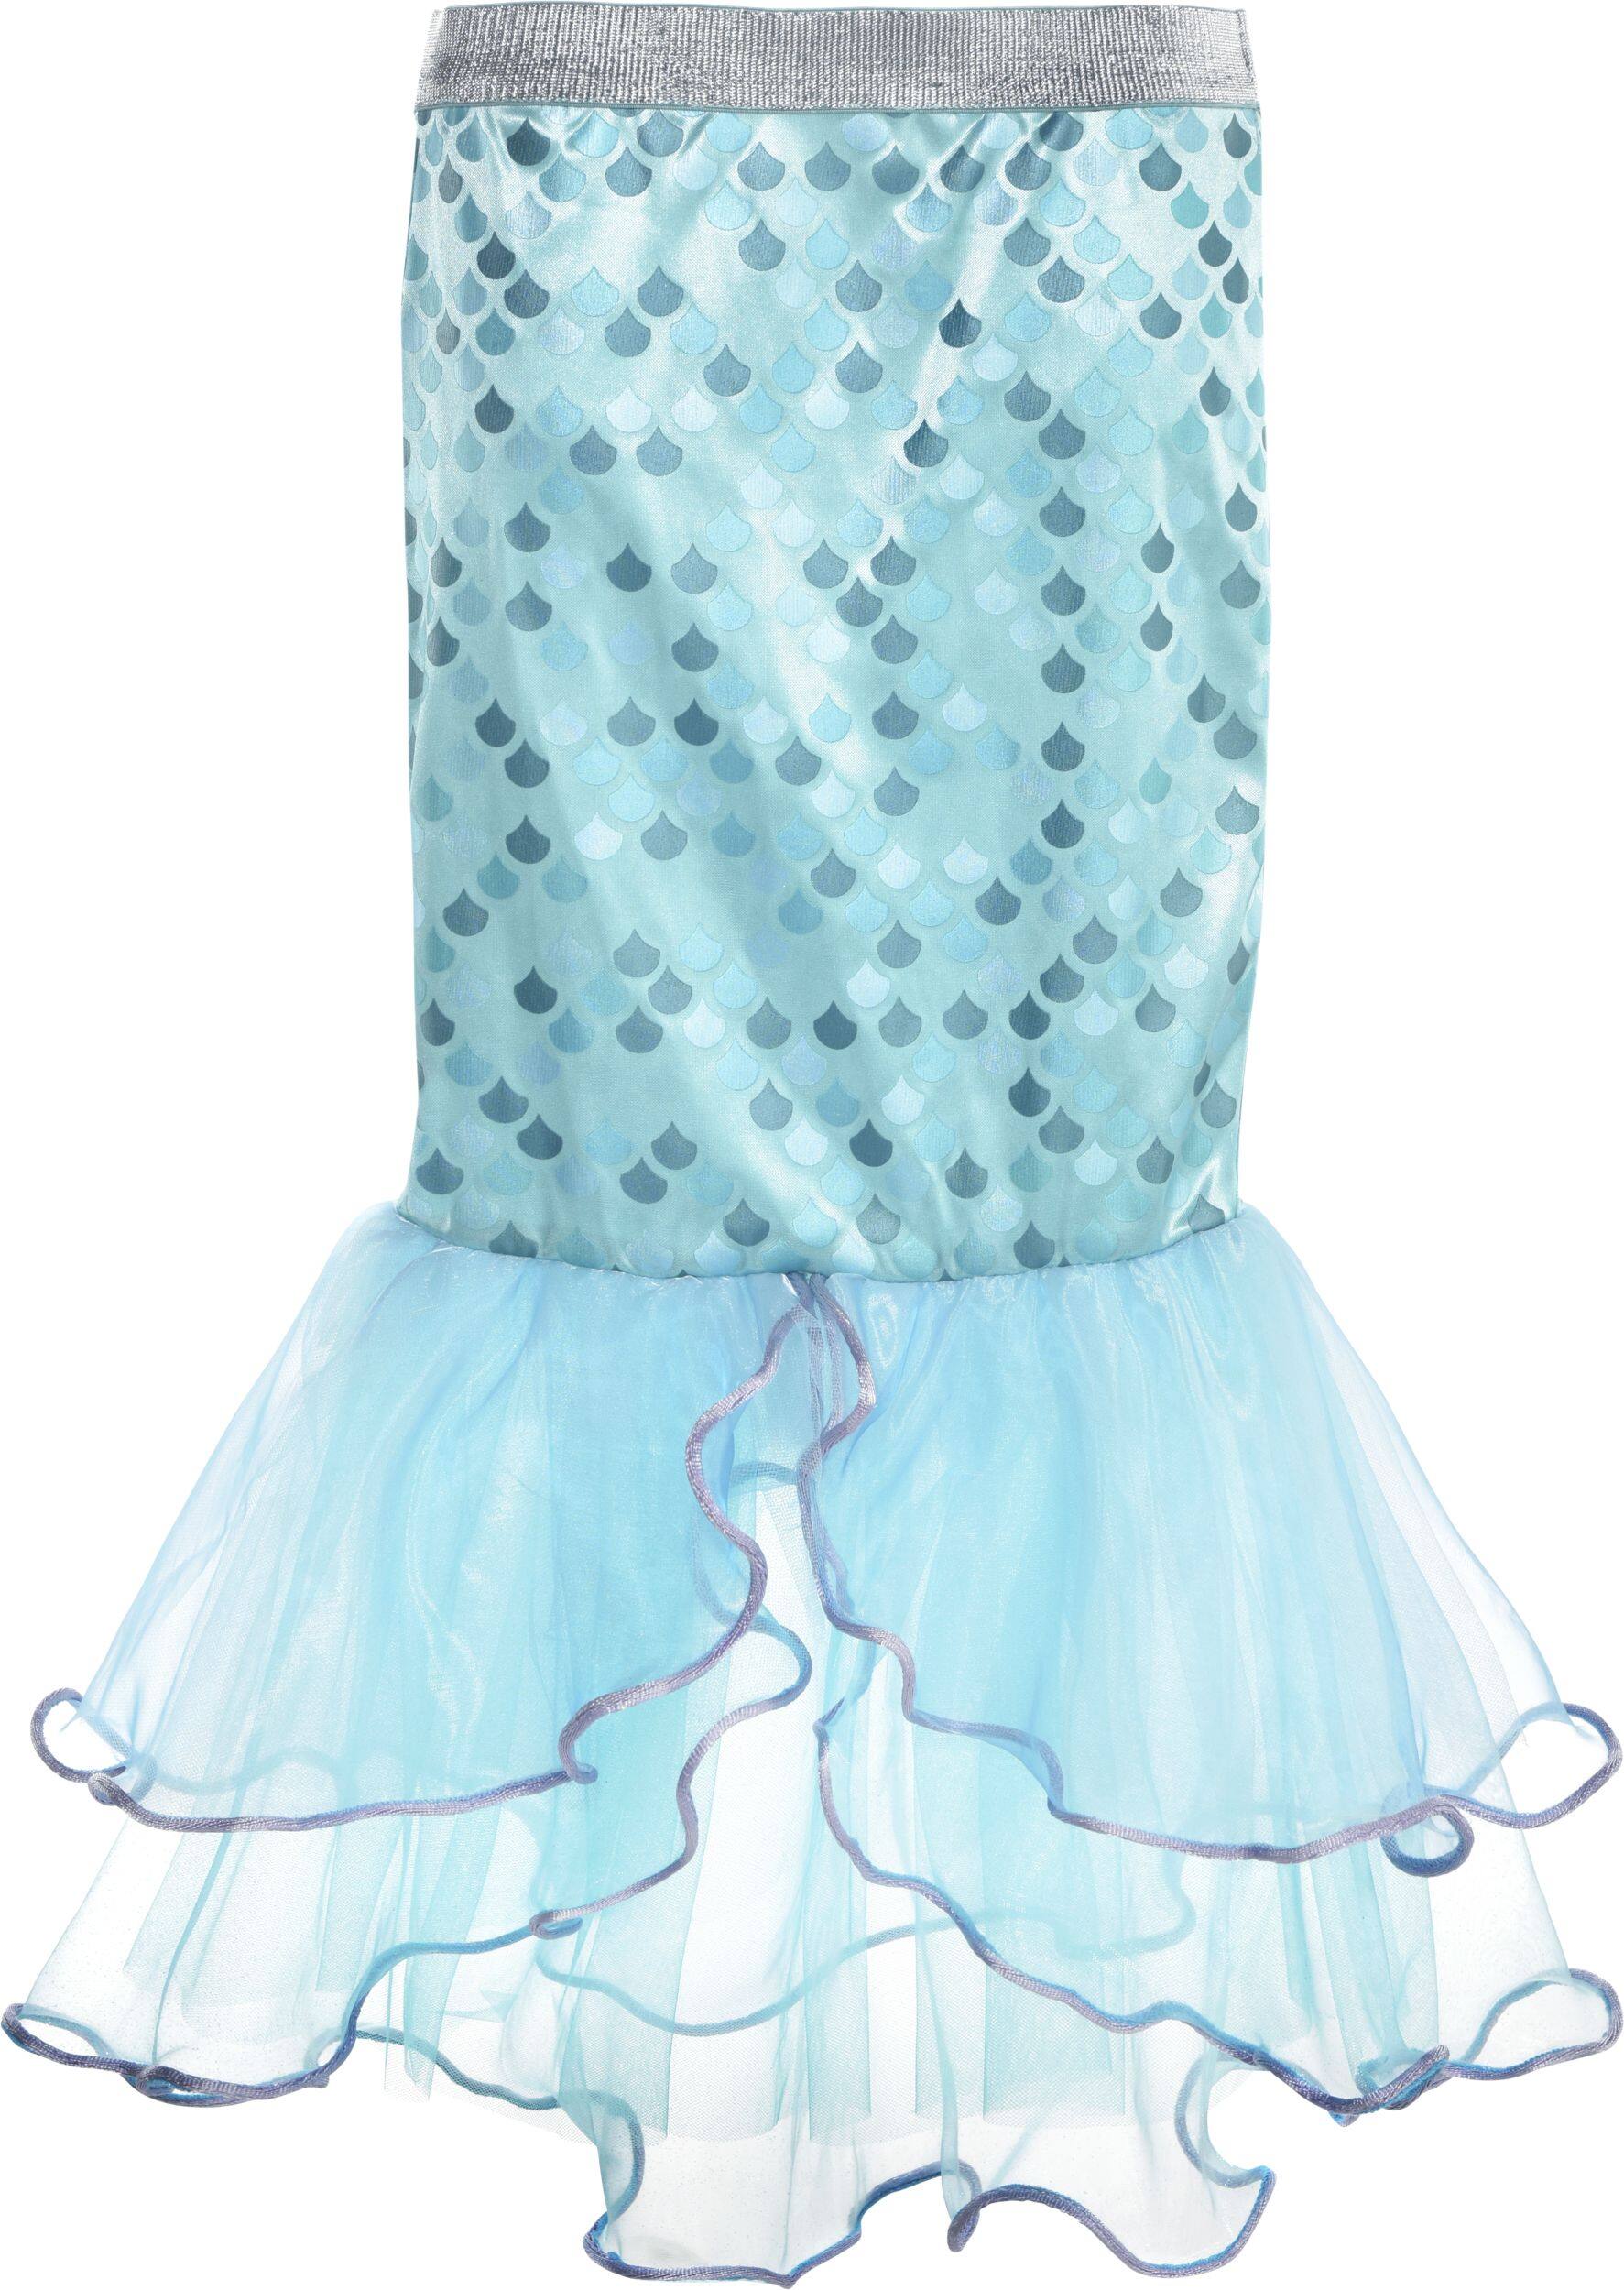 Kids' The Little Mermaid Ariel Party Skirt | Party City